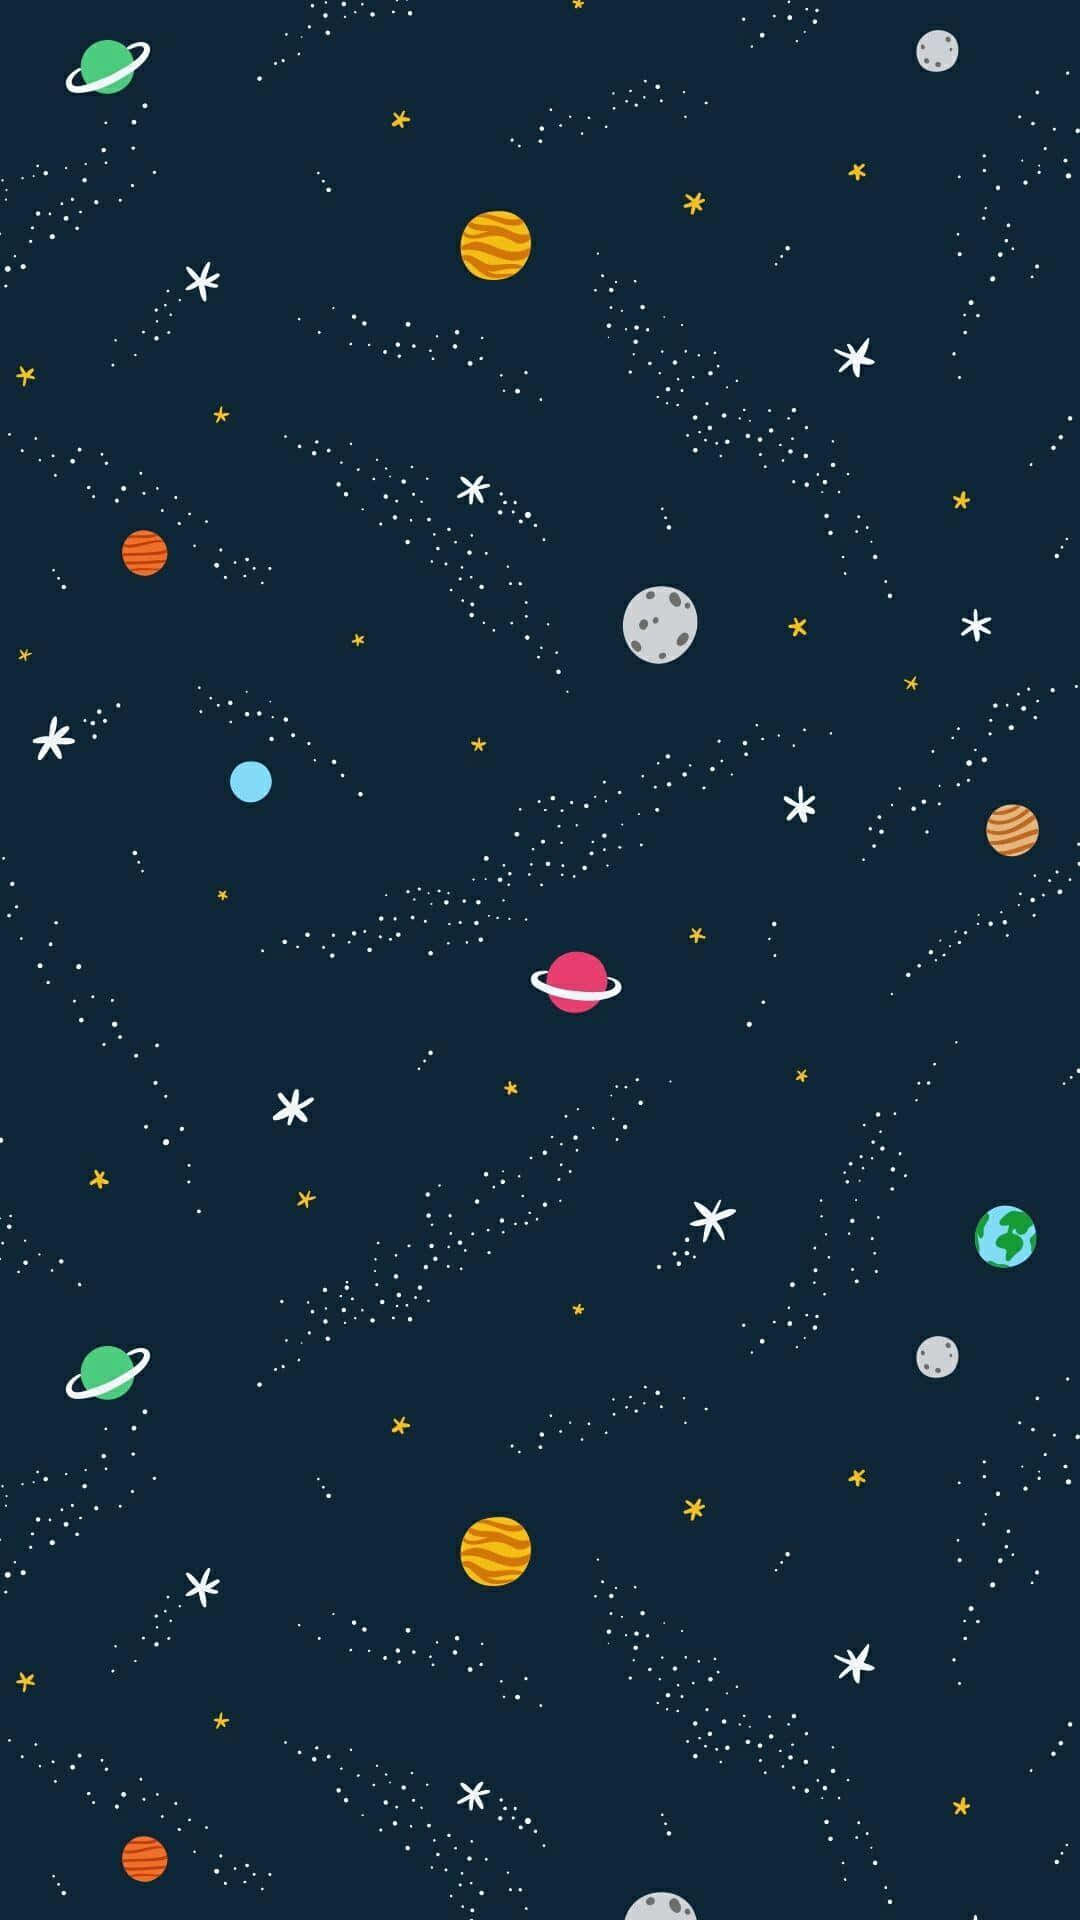 Journey through Kawaii Space with Cute Planets and Stars Wallpaper